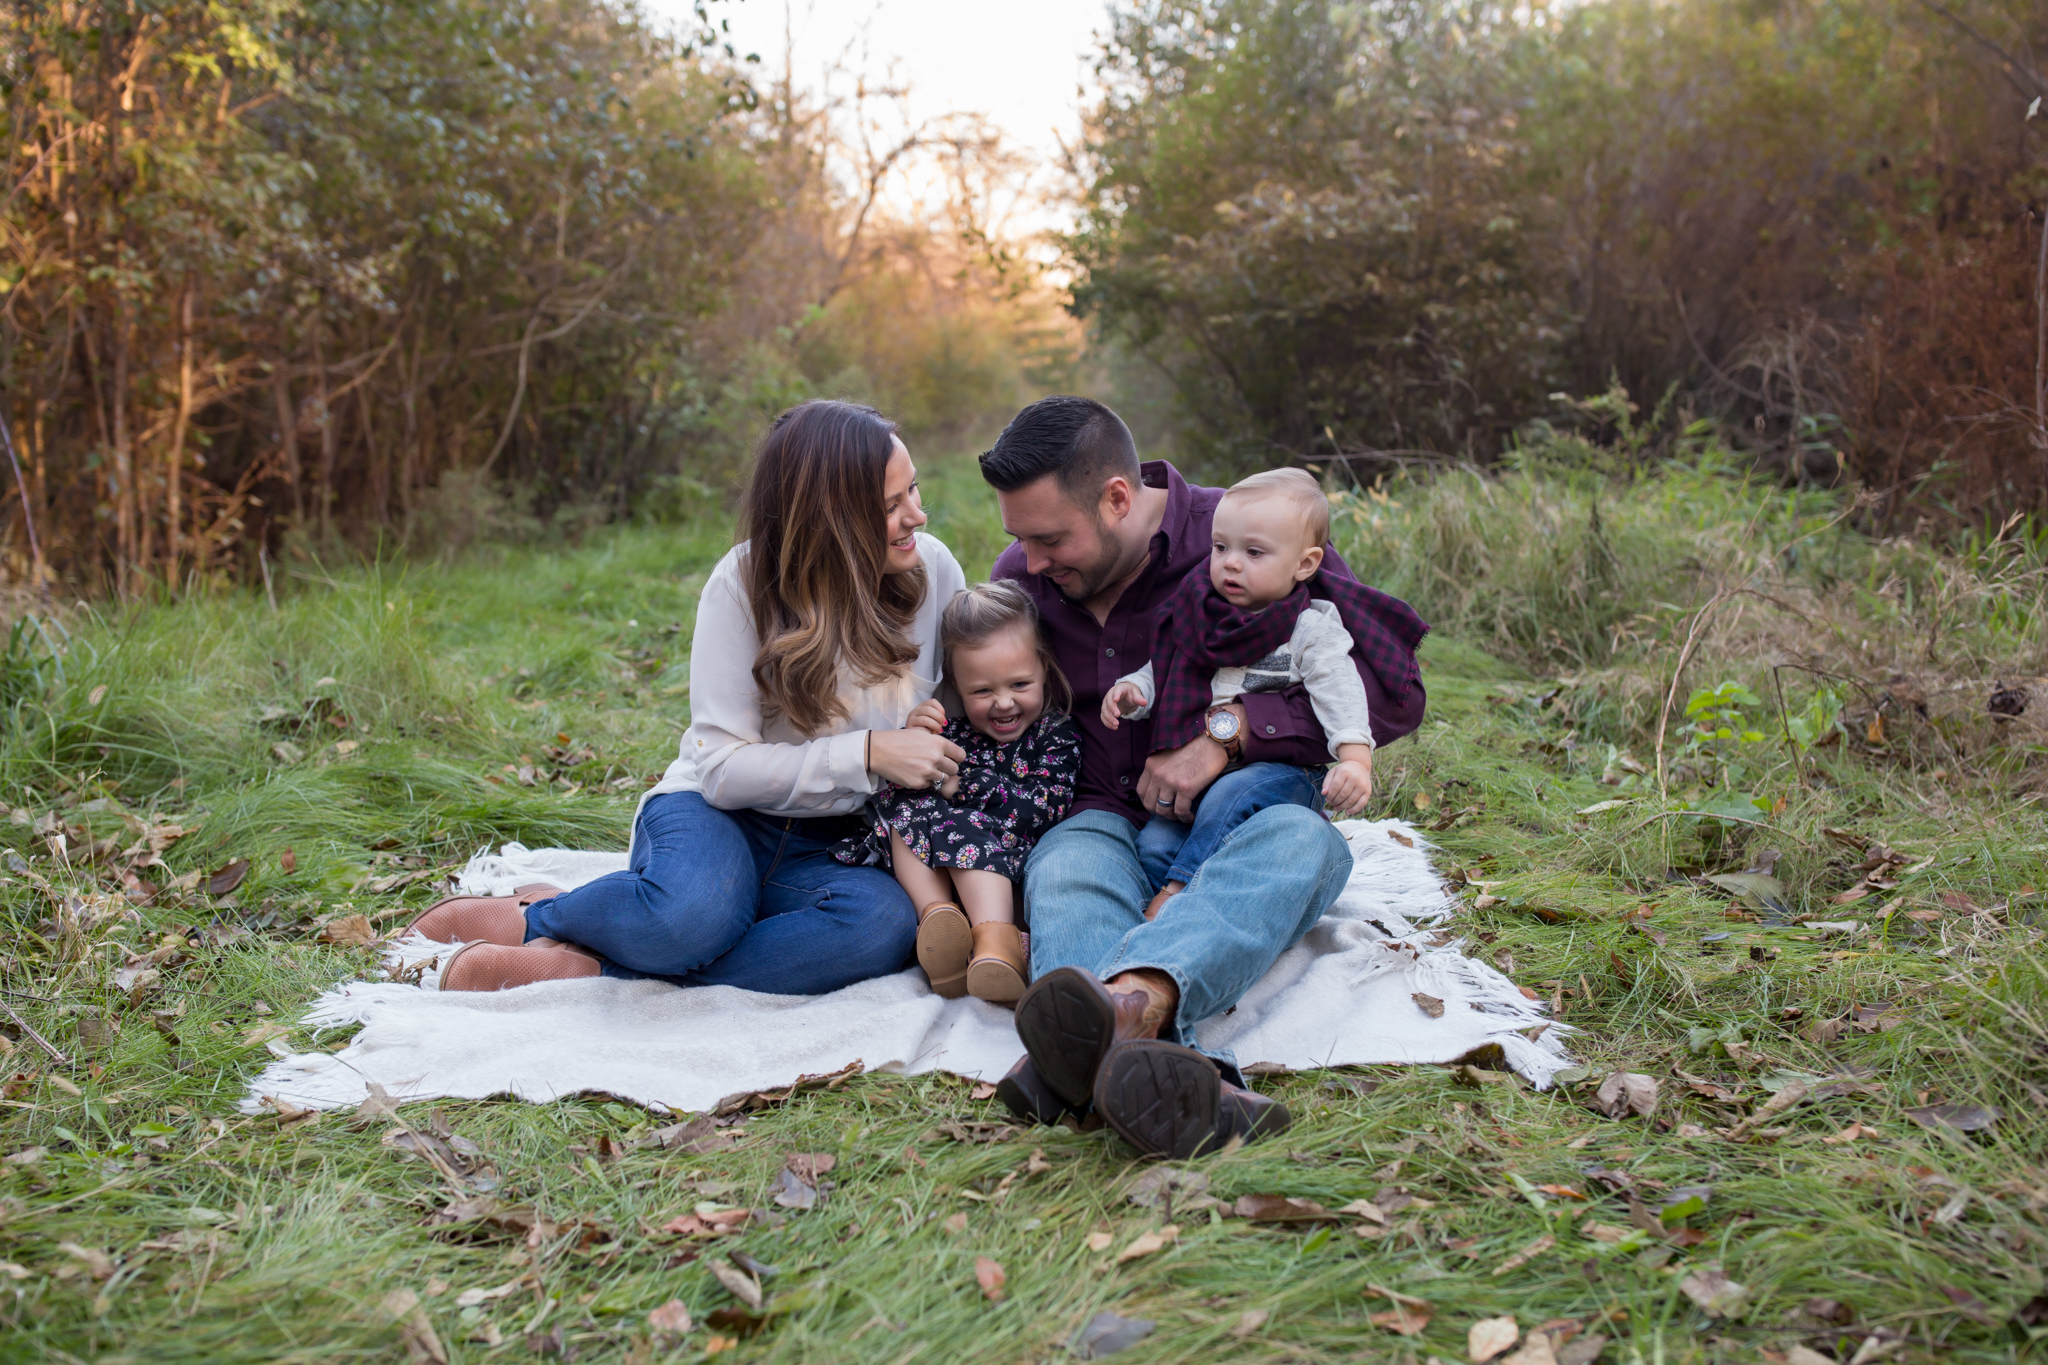 Hailey Family Fall Session, 2 kinds, family poses with young kids, Cara Peterson Photography Rockford IL-2.jpg